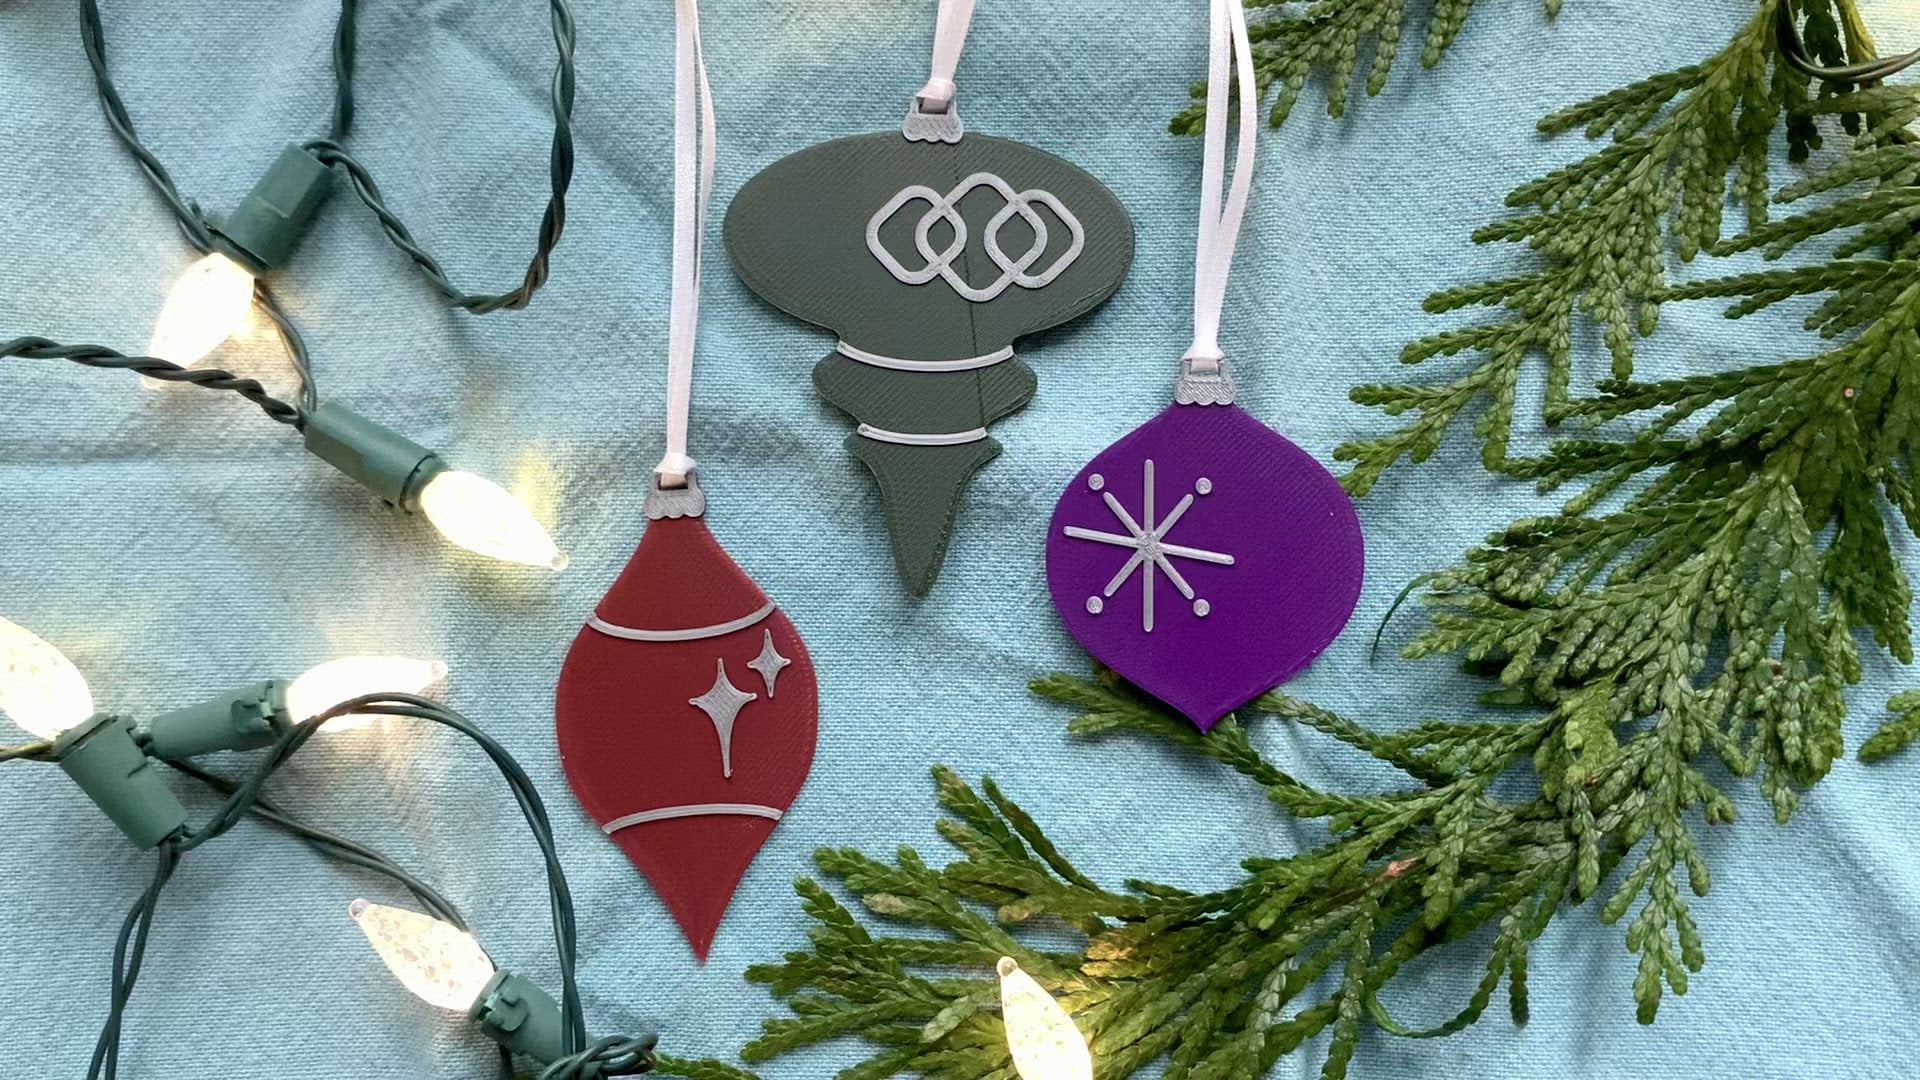 On a bright blue background with  evergreen branches and a string of lights are a set of 3 R+D 3D printed ornaments. They are all designed to look like vintage baubles that would have commonly been found on Christmas trees in the past. They each have silver accents of stars and shapes. One is merlot red, one is dark green, and one is purple.